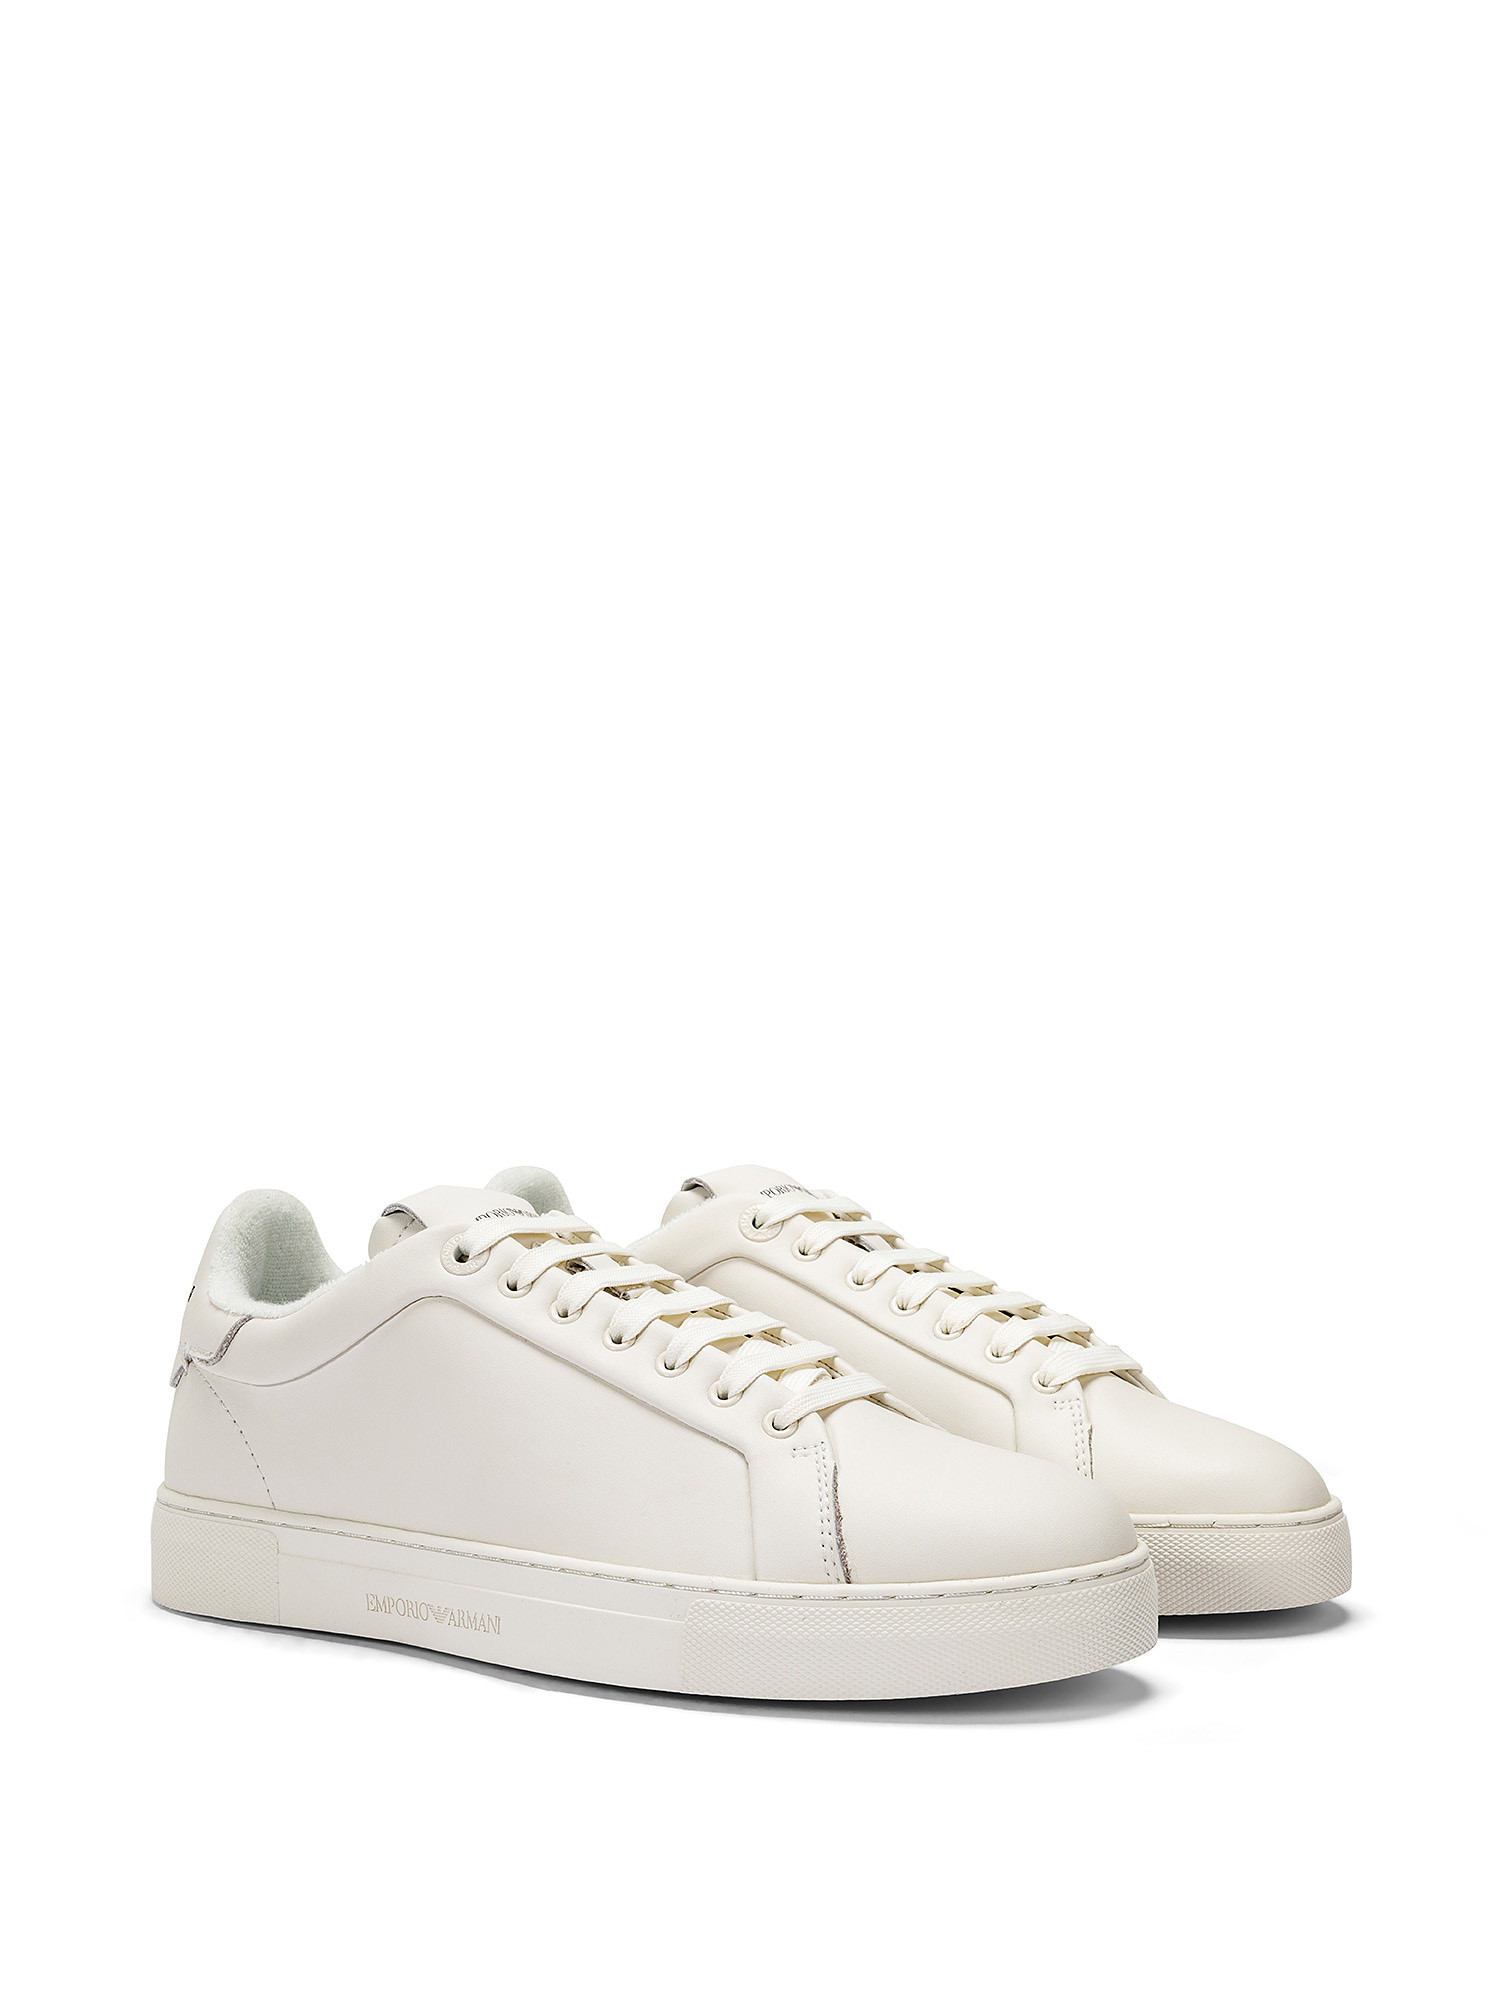 Emporio Armani - Sneakers, Bianco, large image number 1